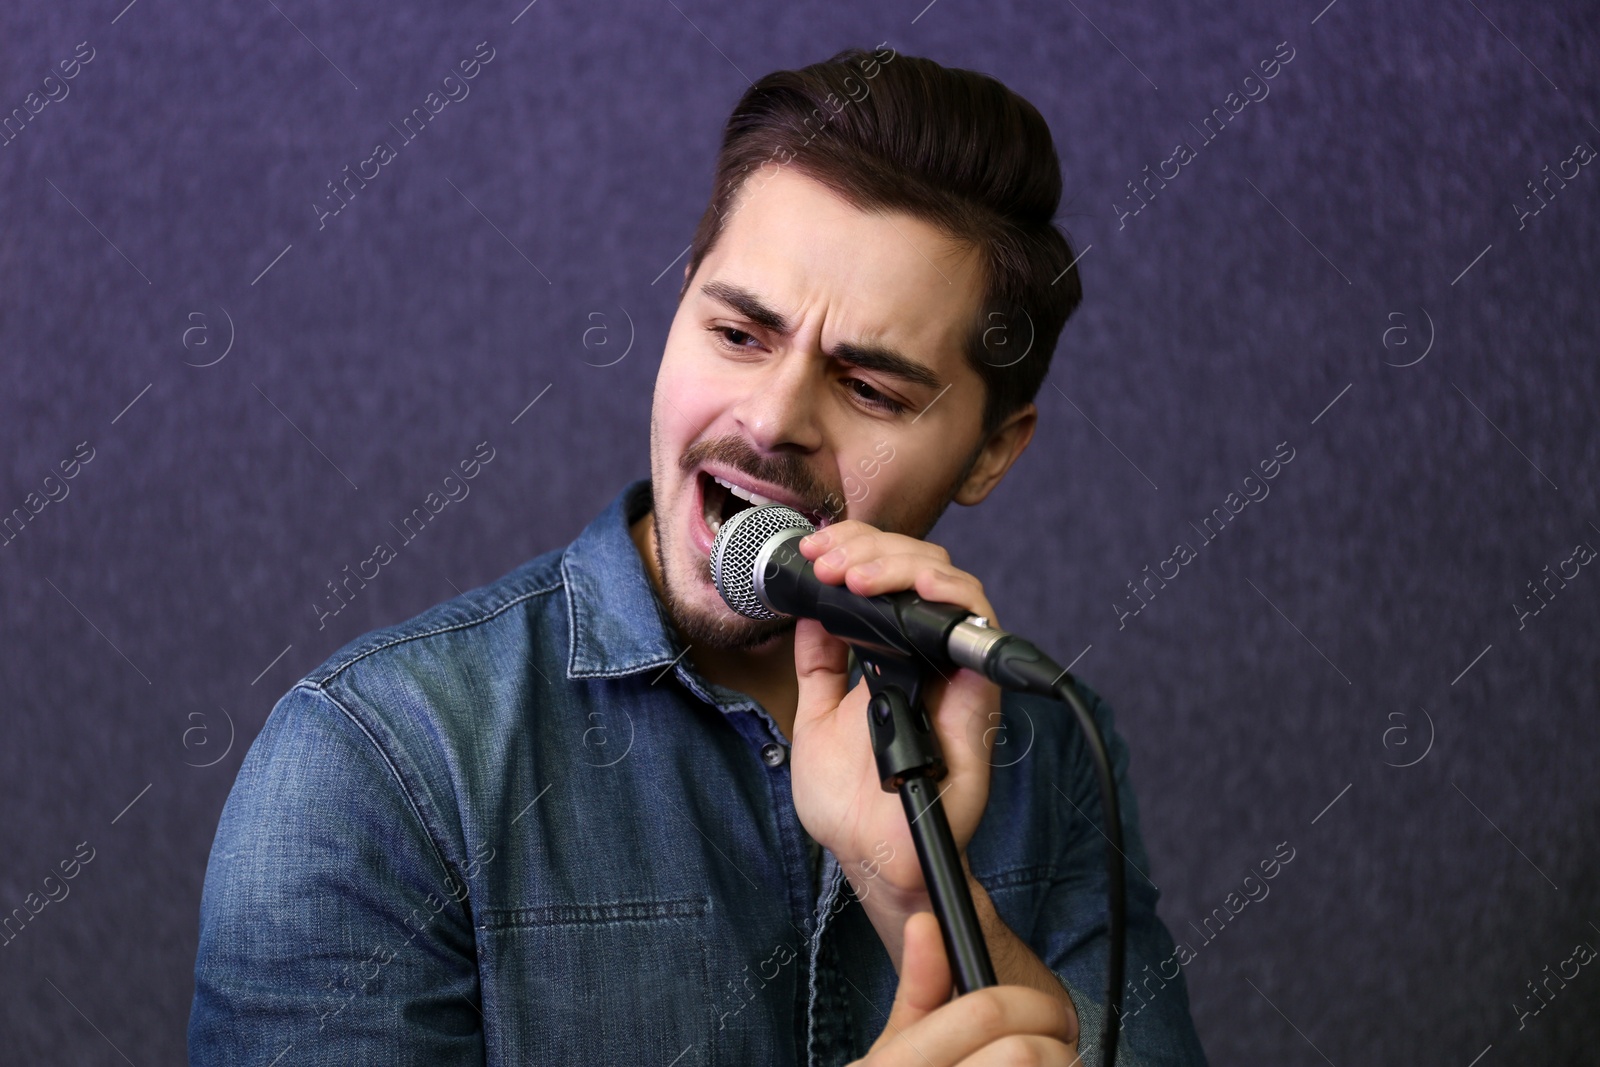 Photo of Young singer with microphone recording song in studio